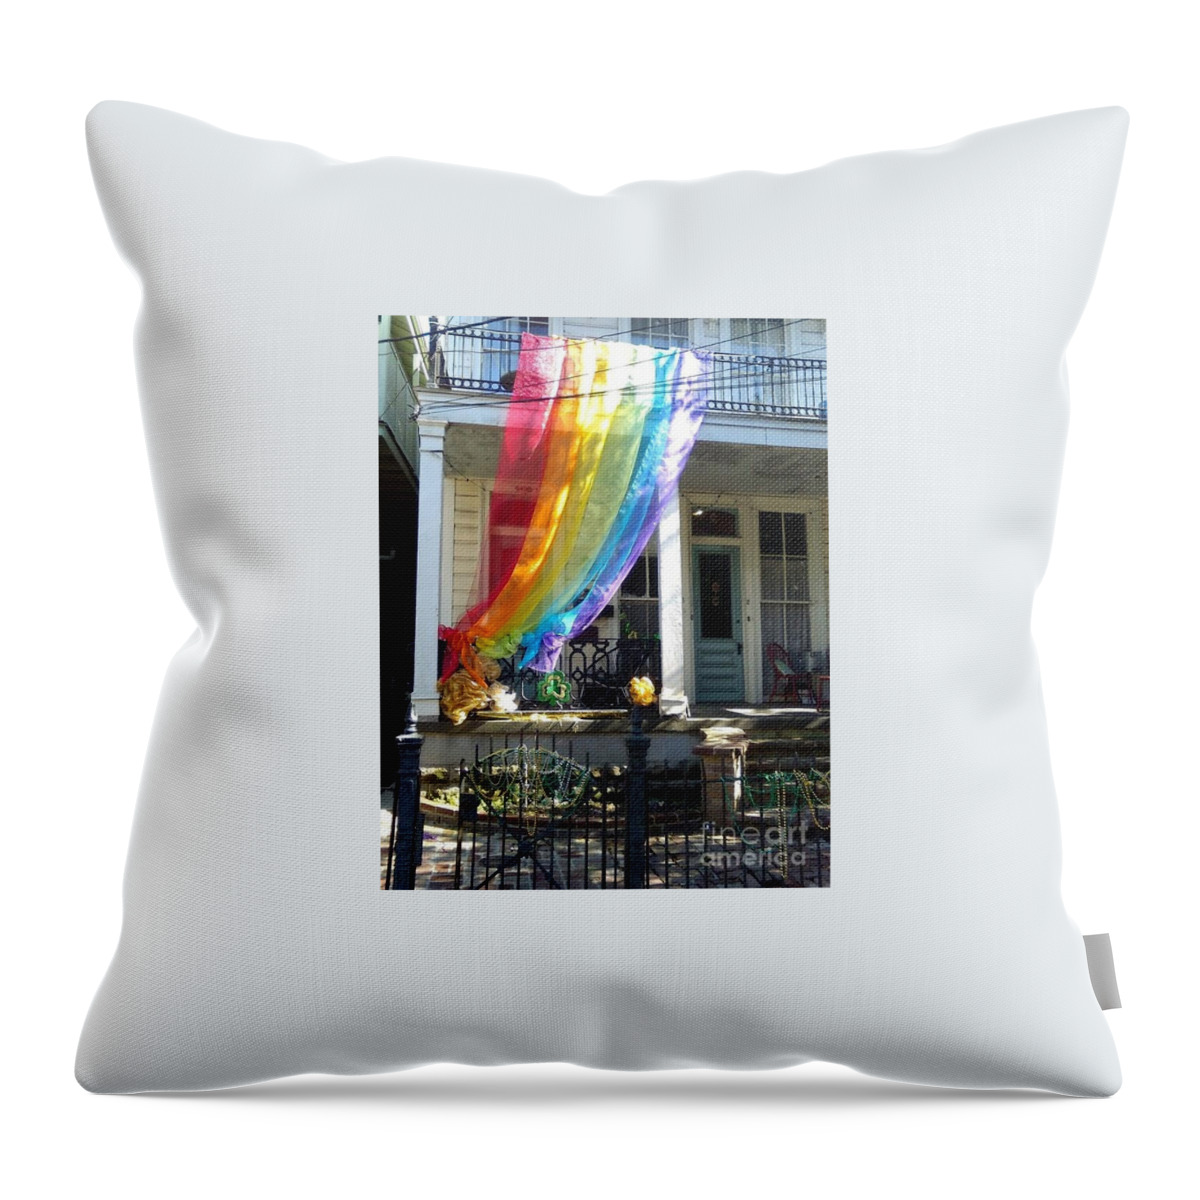 Nola Throw Pillow featuring the photograph New Orleans House Of The Pot Of Gold In The Irsh Channel by Michael Hoard